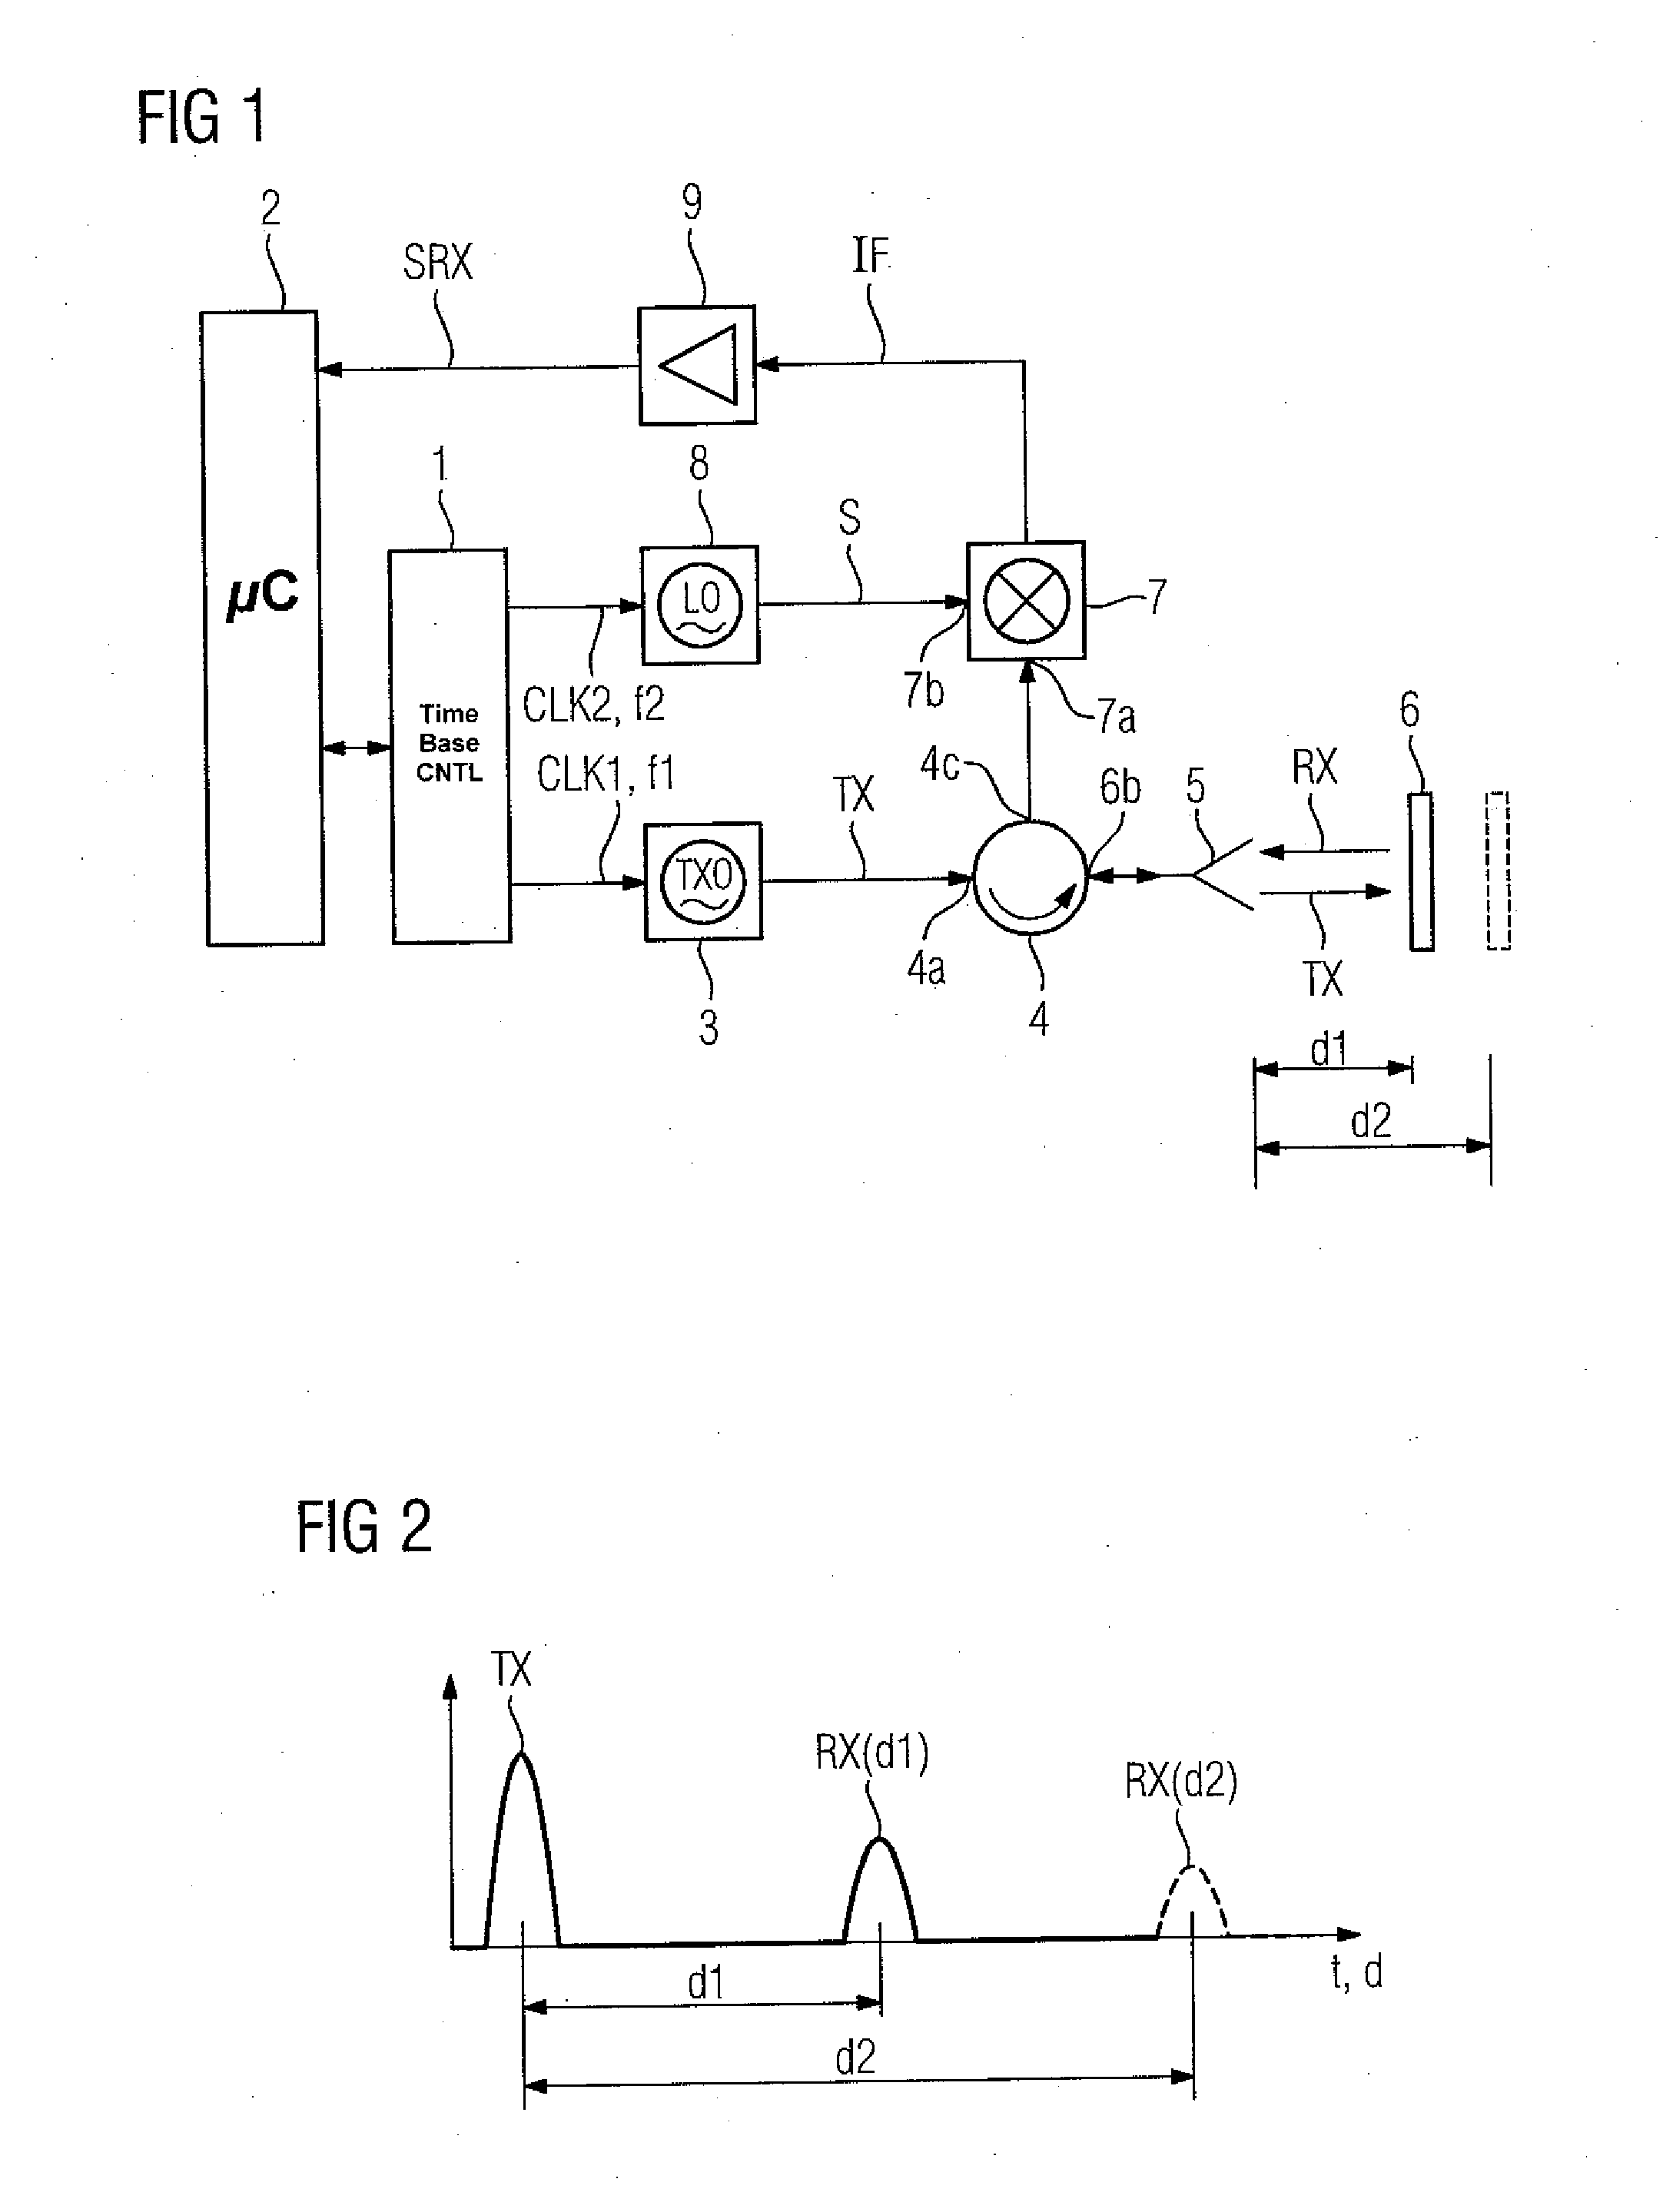 Time Base Generator and Method for Providing a First Clock Signal and a Second Clock Signal